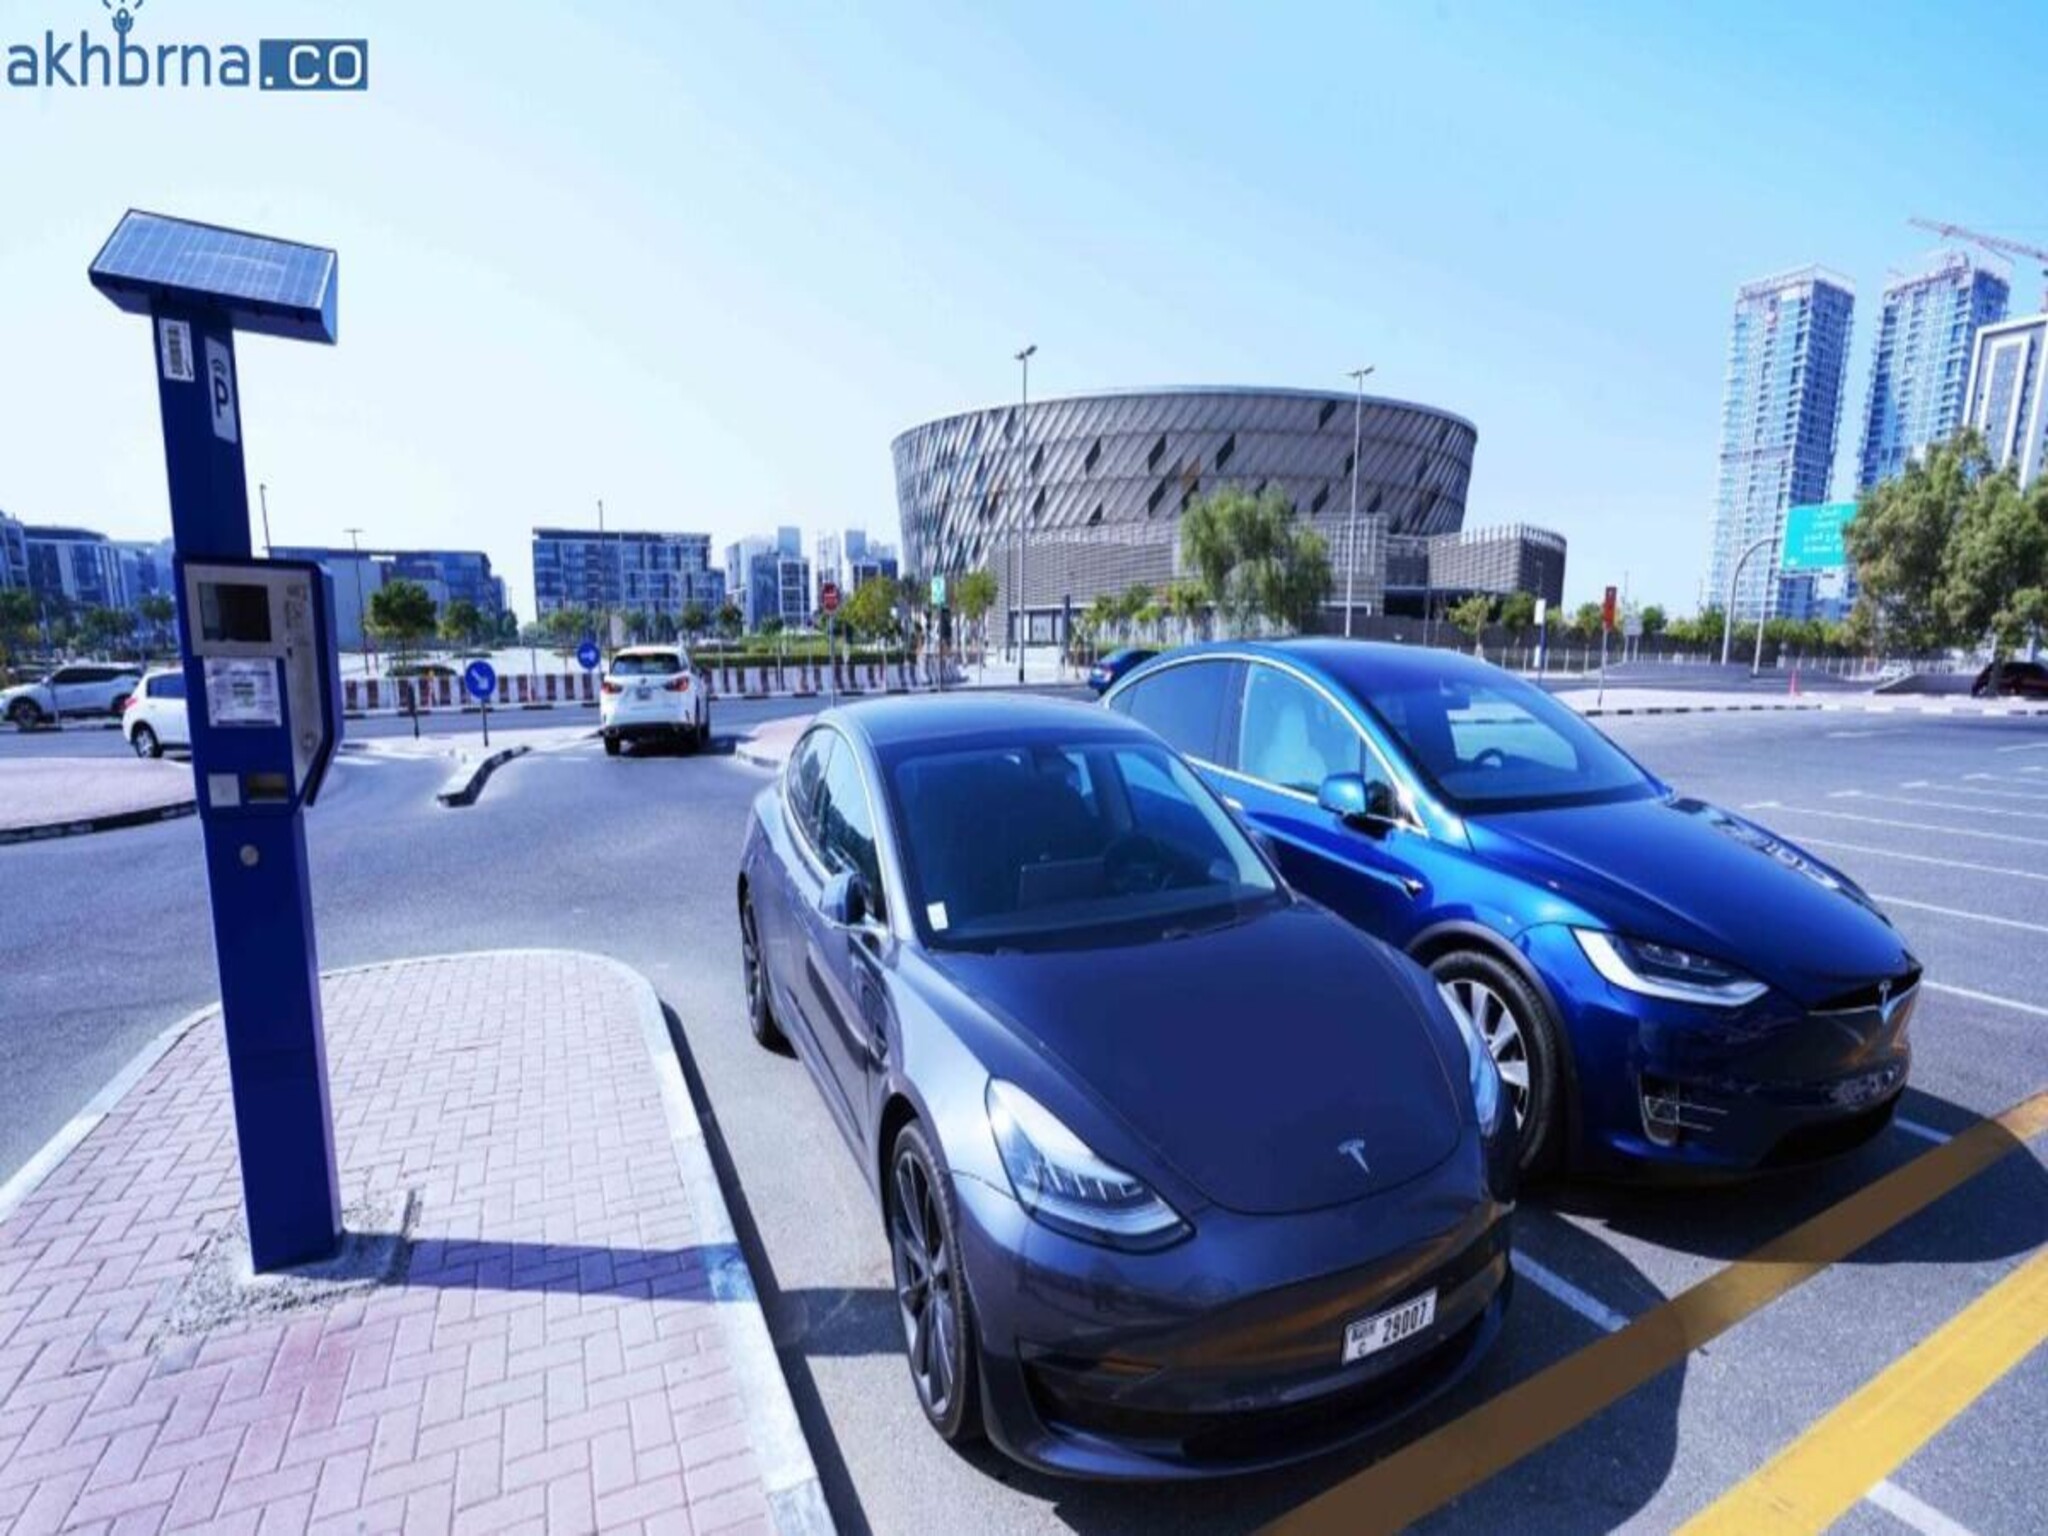 Dubai government announces free parking for Eid Al Fitr holidays, From April 8